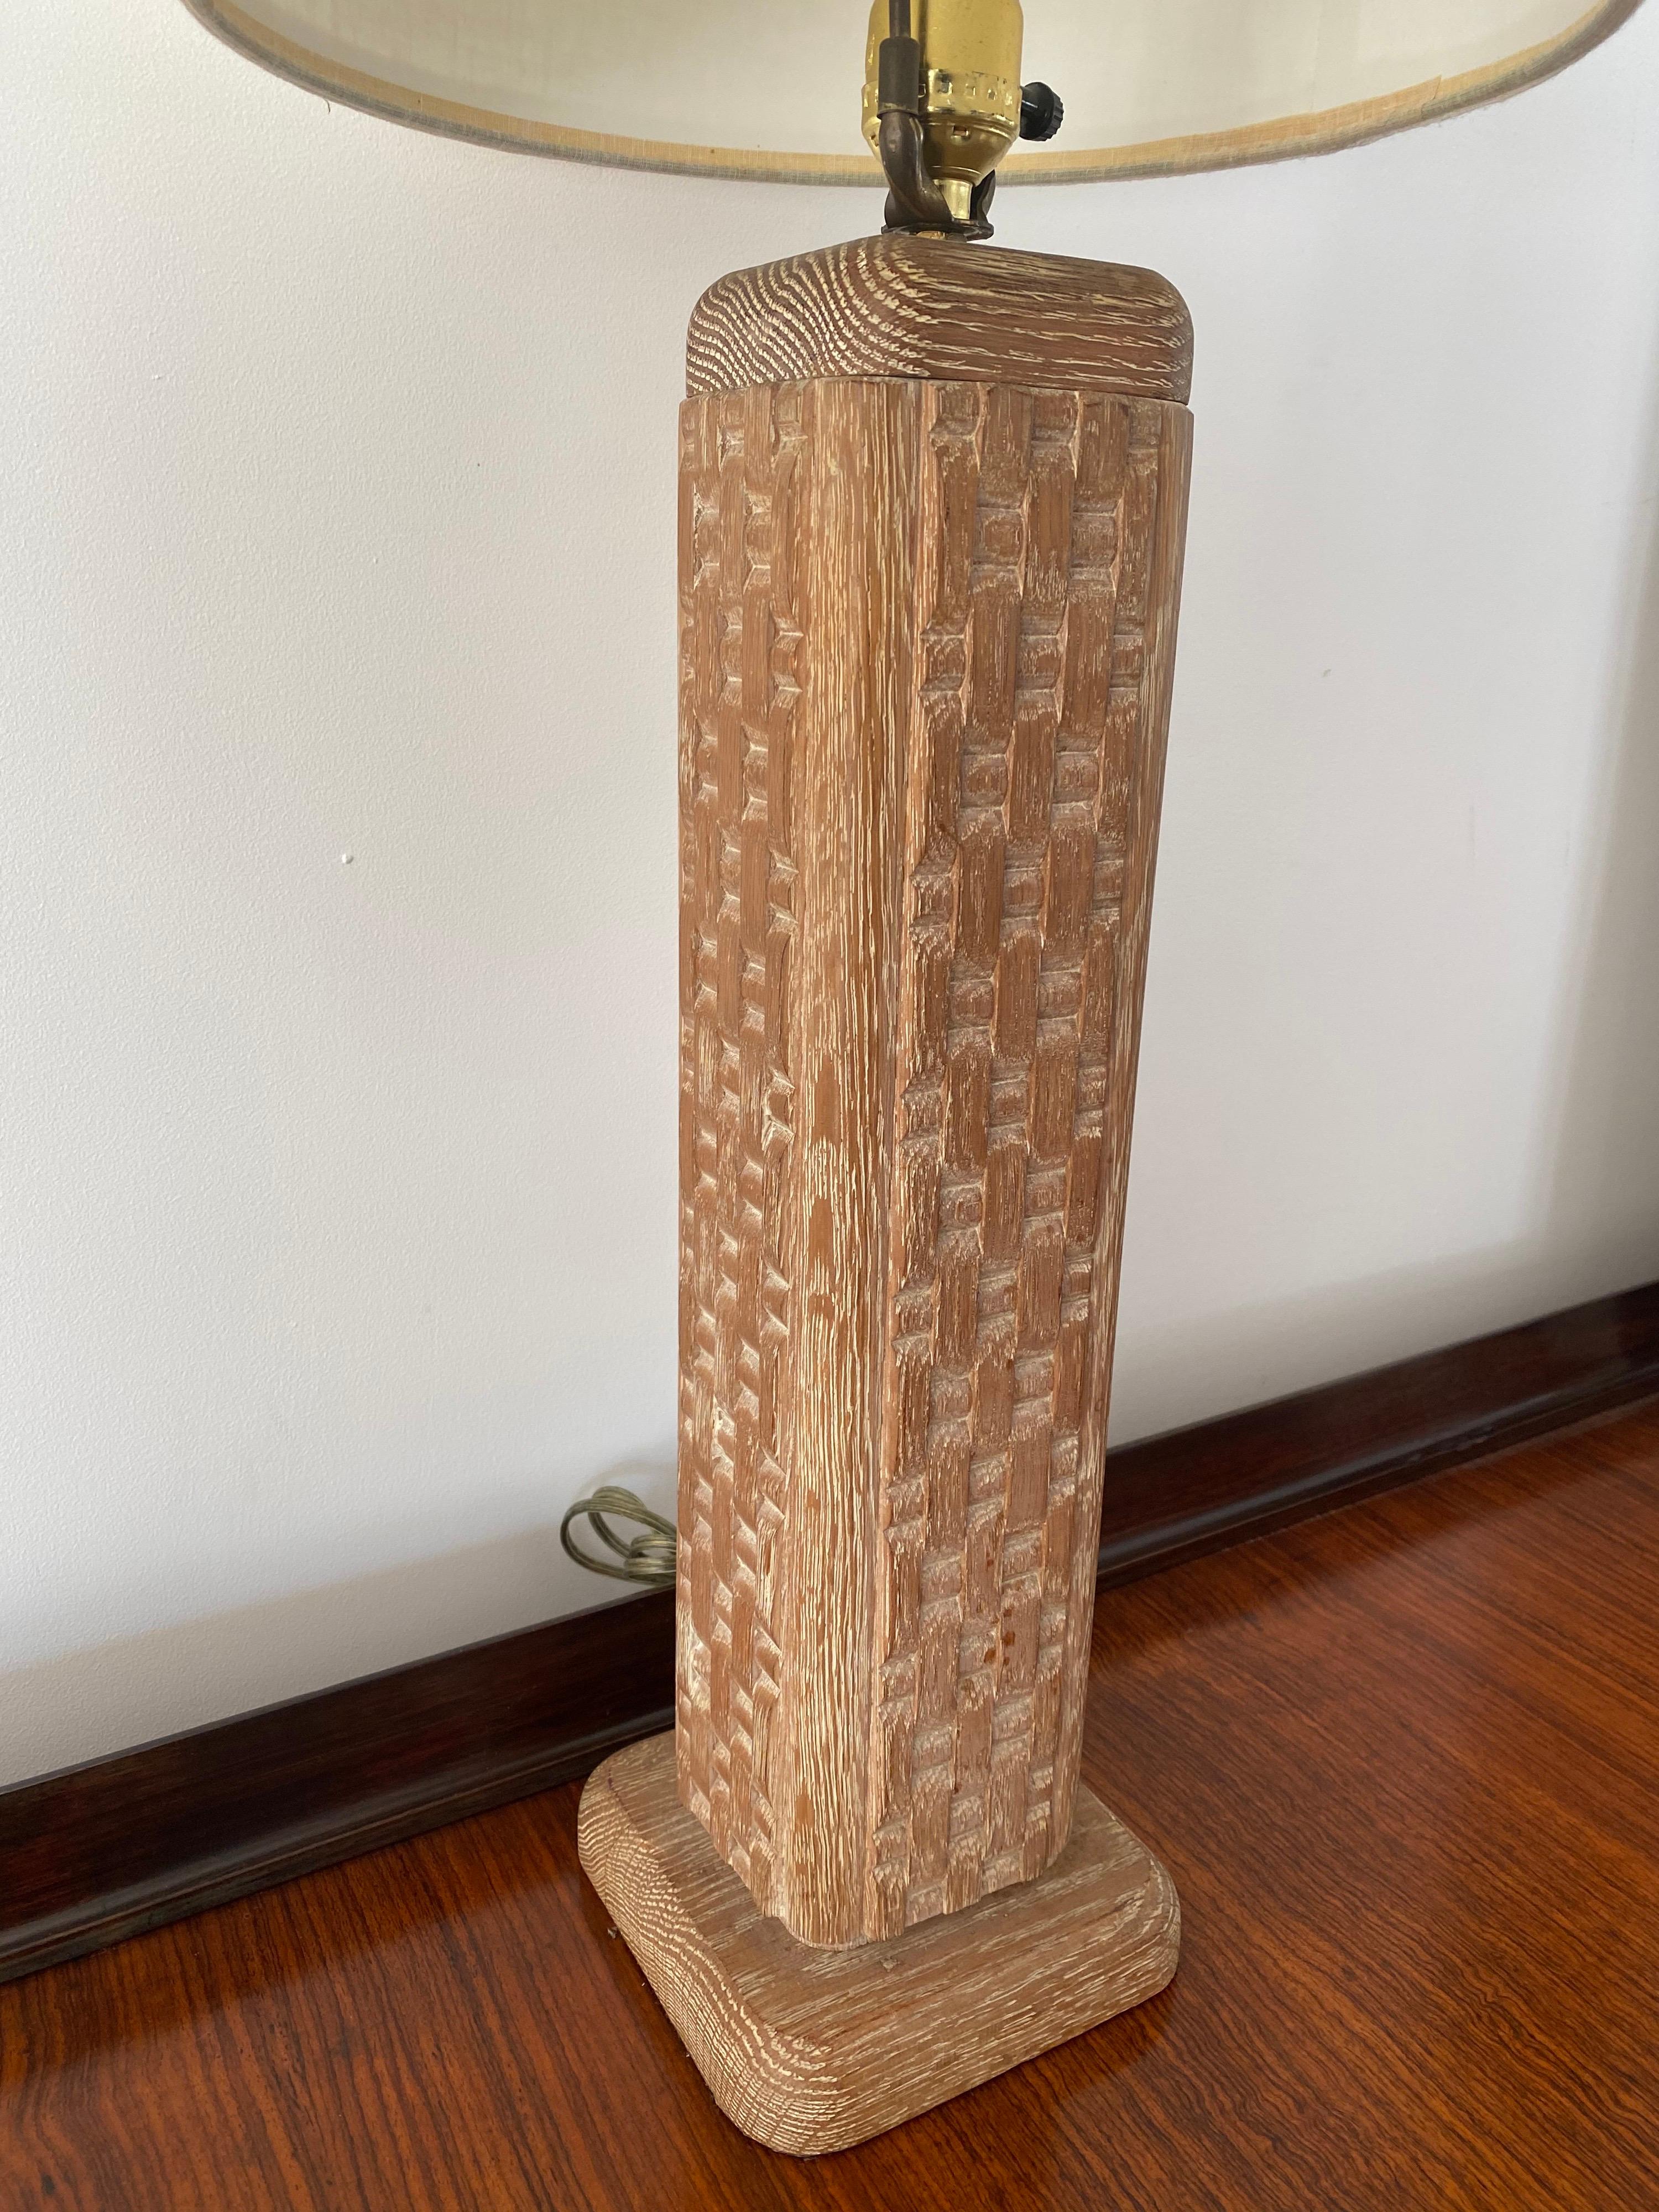 A French square cerused oak table lamp. Includes coordinating harp and finial.

Shade for display only. Lamp measures 34.5